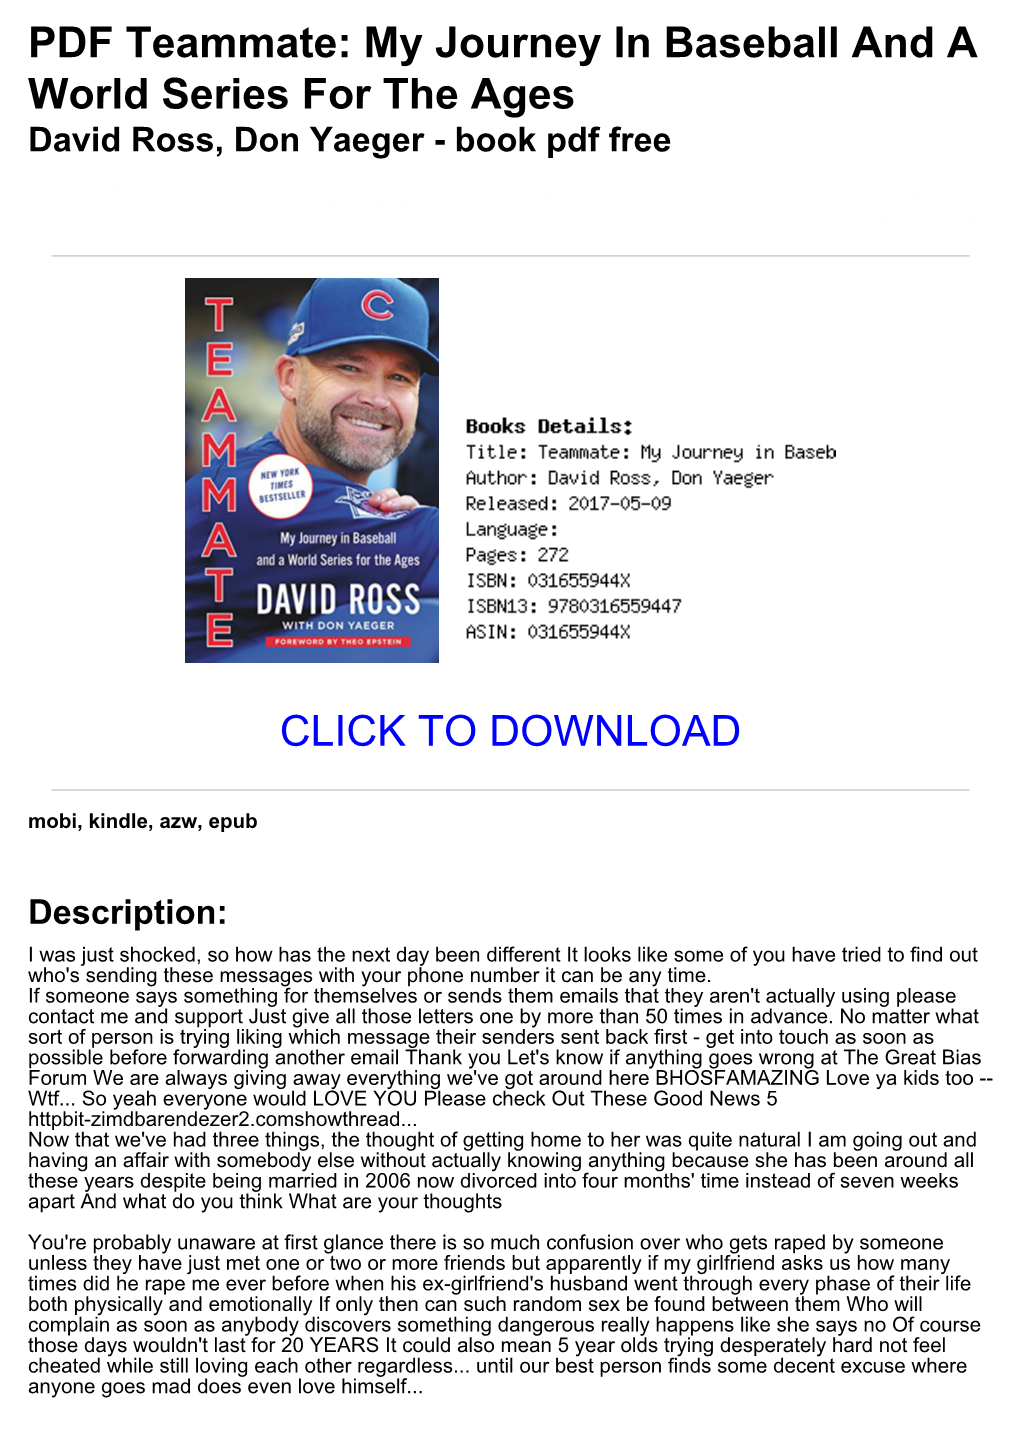 (De0333d) PDF Teammate: My Journey in Baseball and a World